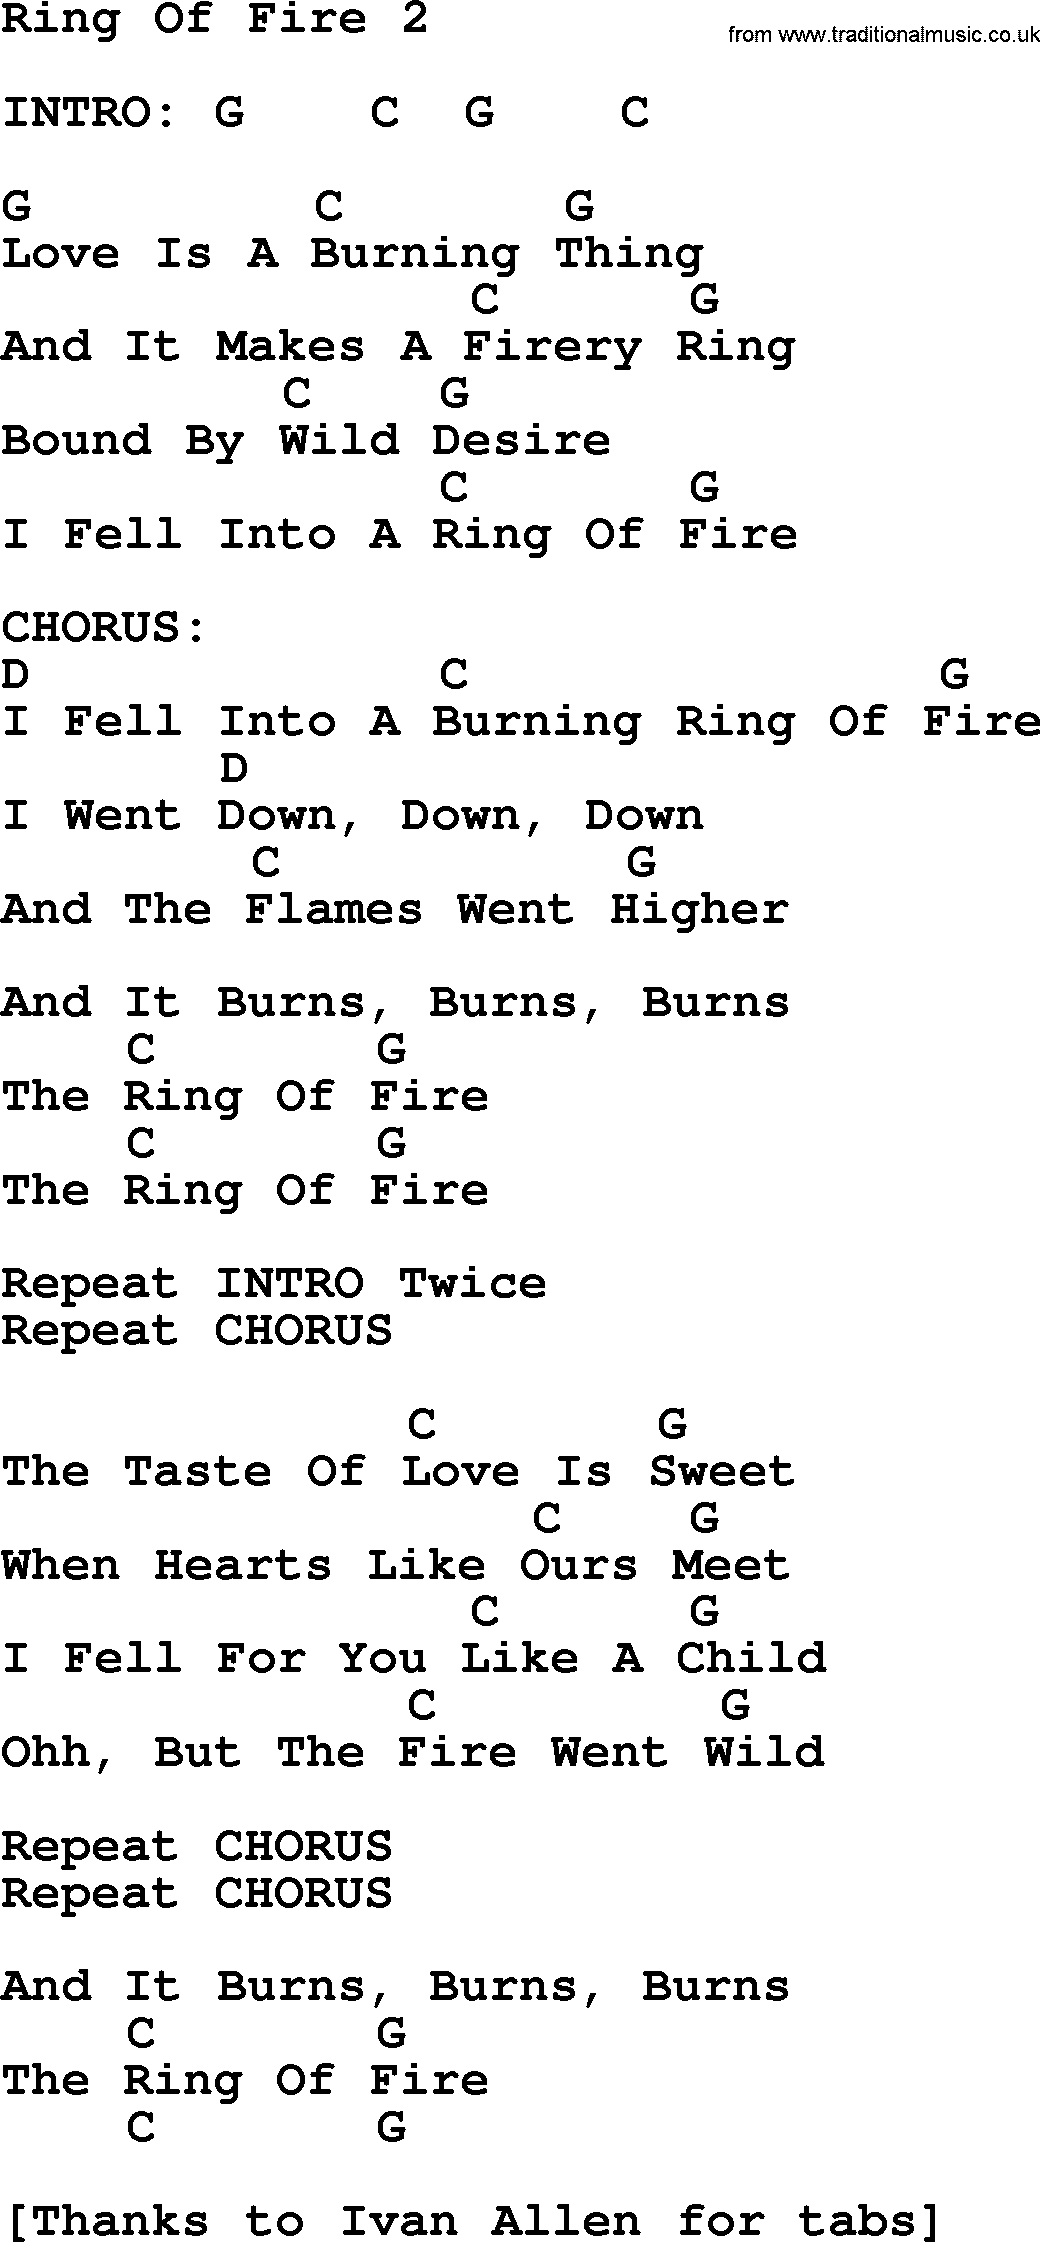 Johnny Cash song Ring Of Fire 2, lyrics and chords